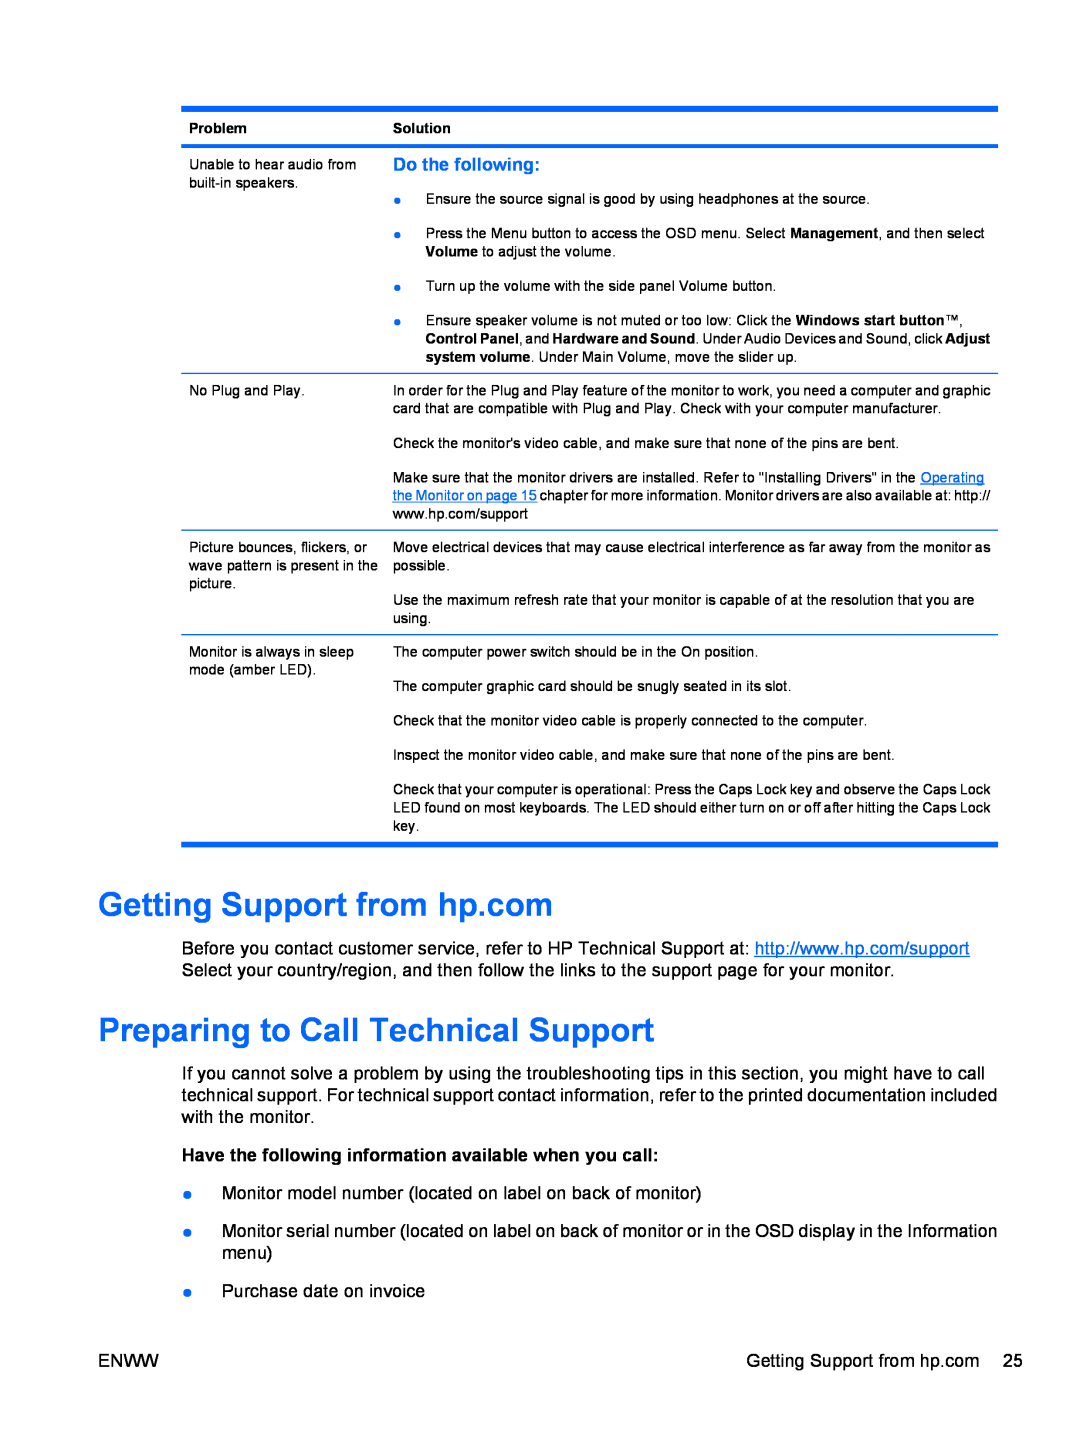 HP Q2210S, Q2010S, Q1910S manual Getting Support from hp.com, Preparing to Call Technical Support, Do the following 